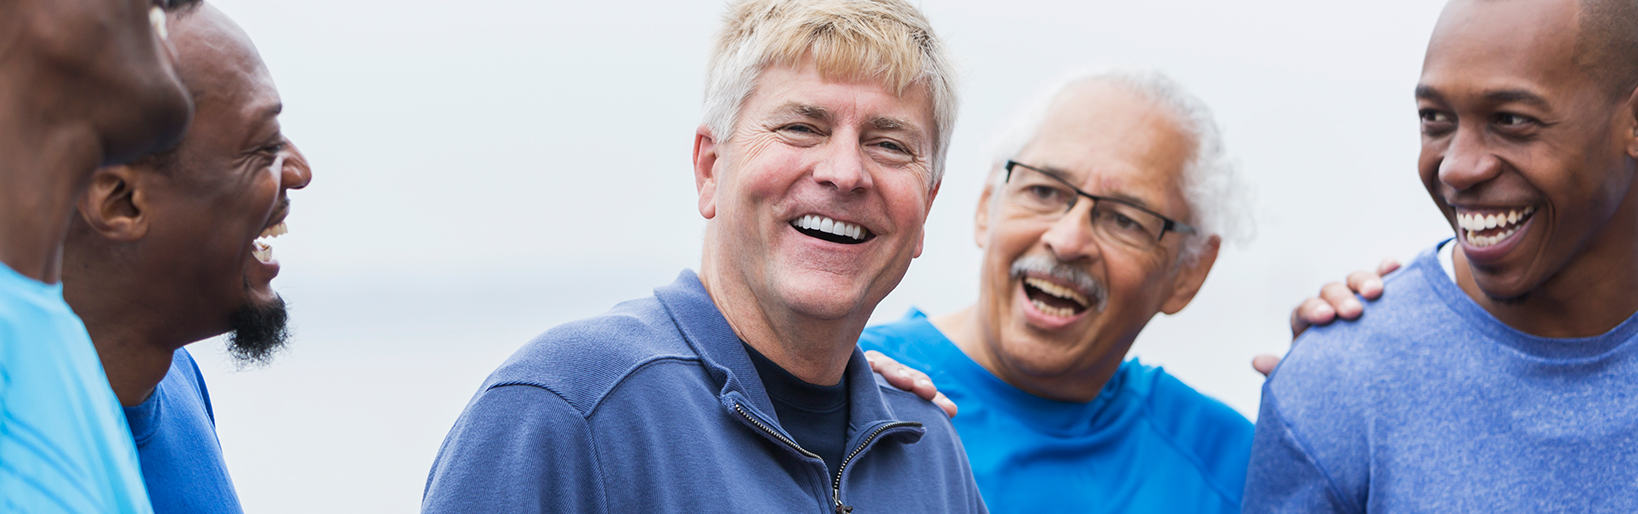 If you’re experiencing problems with your urinary tract or reproductive organs, our experienced team of Houston men’s urologists can help.